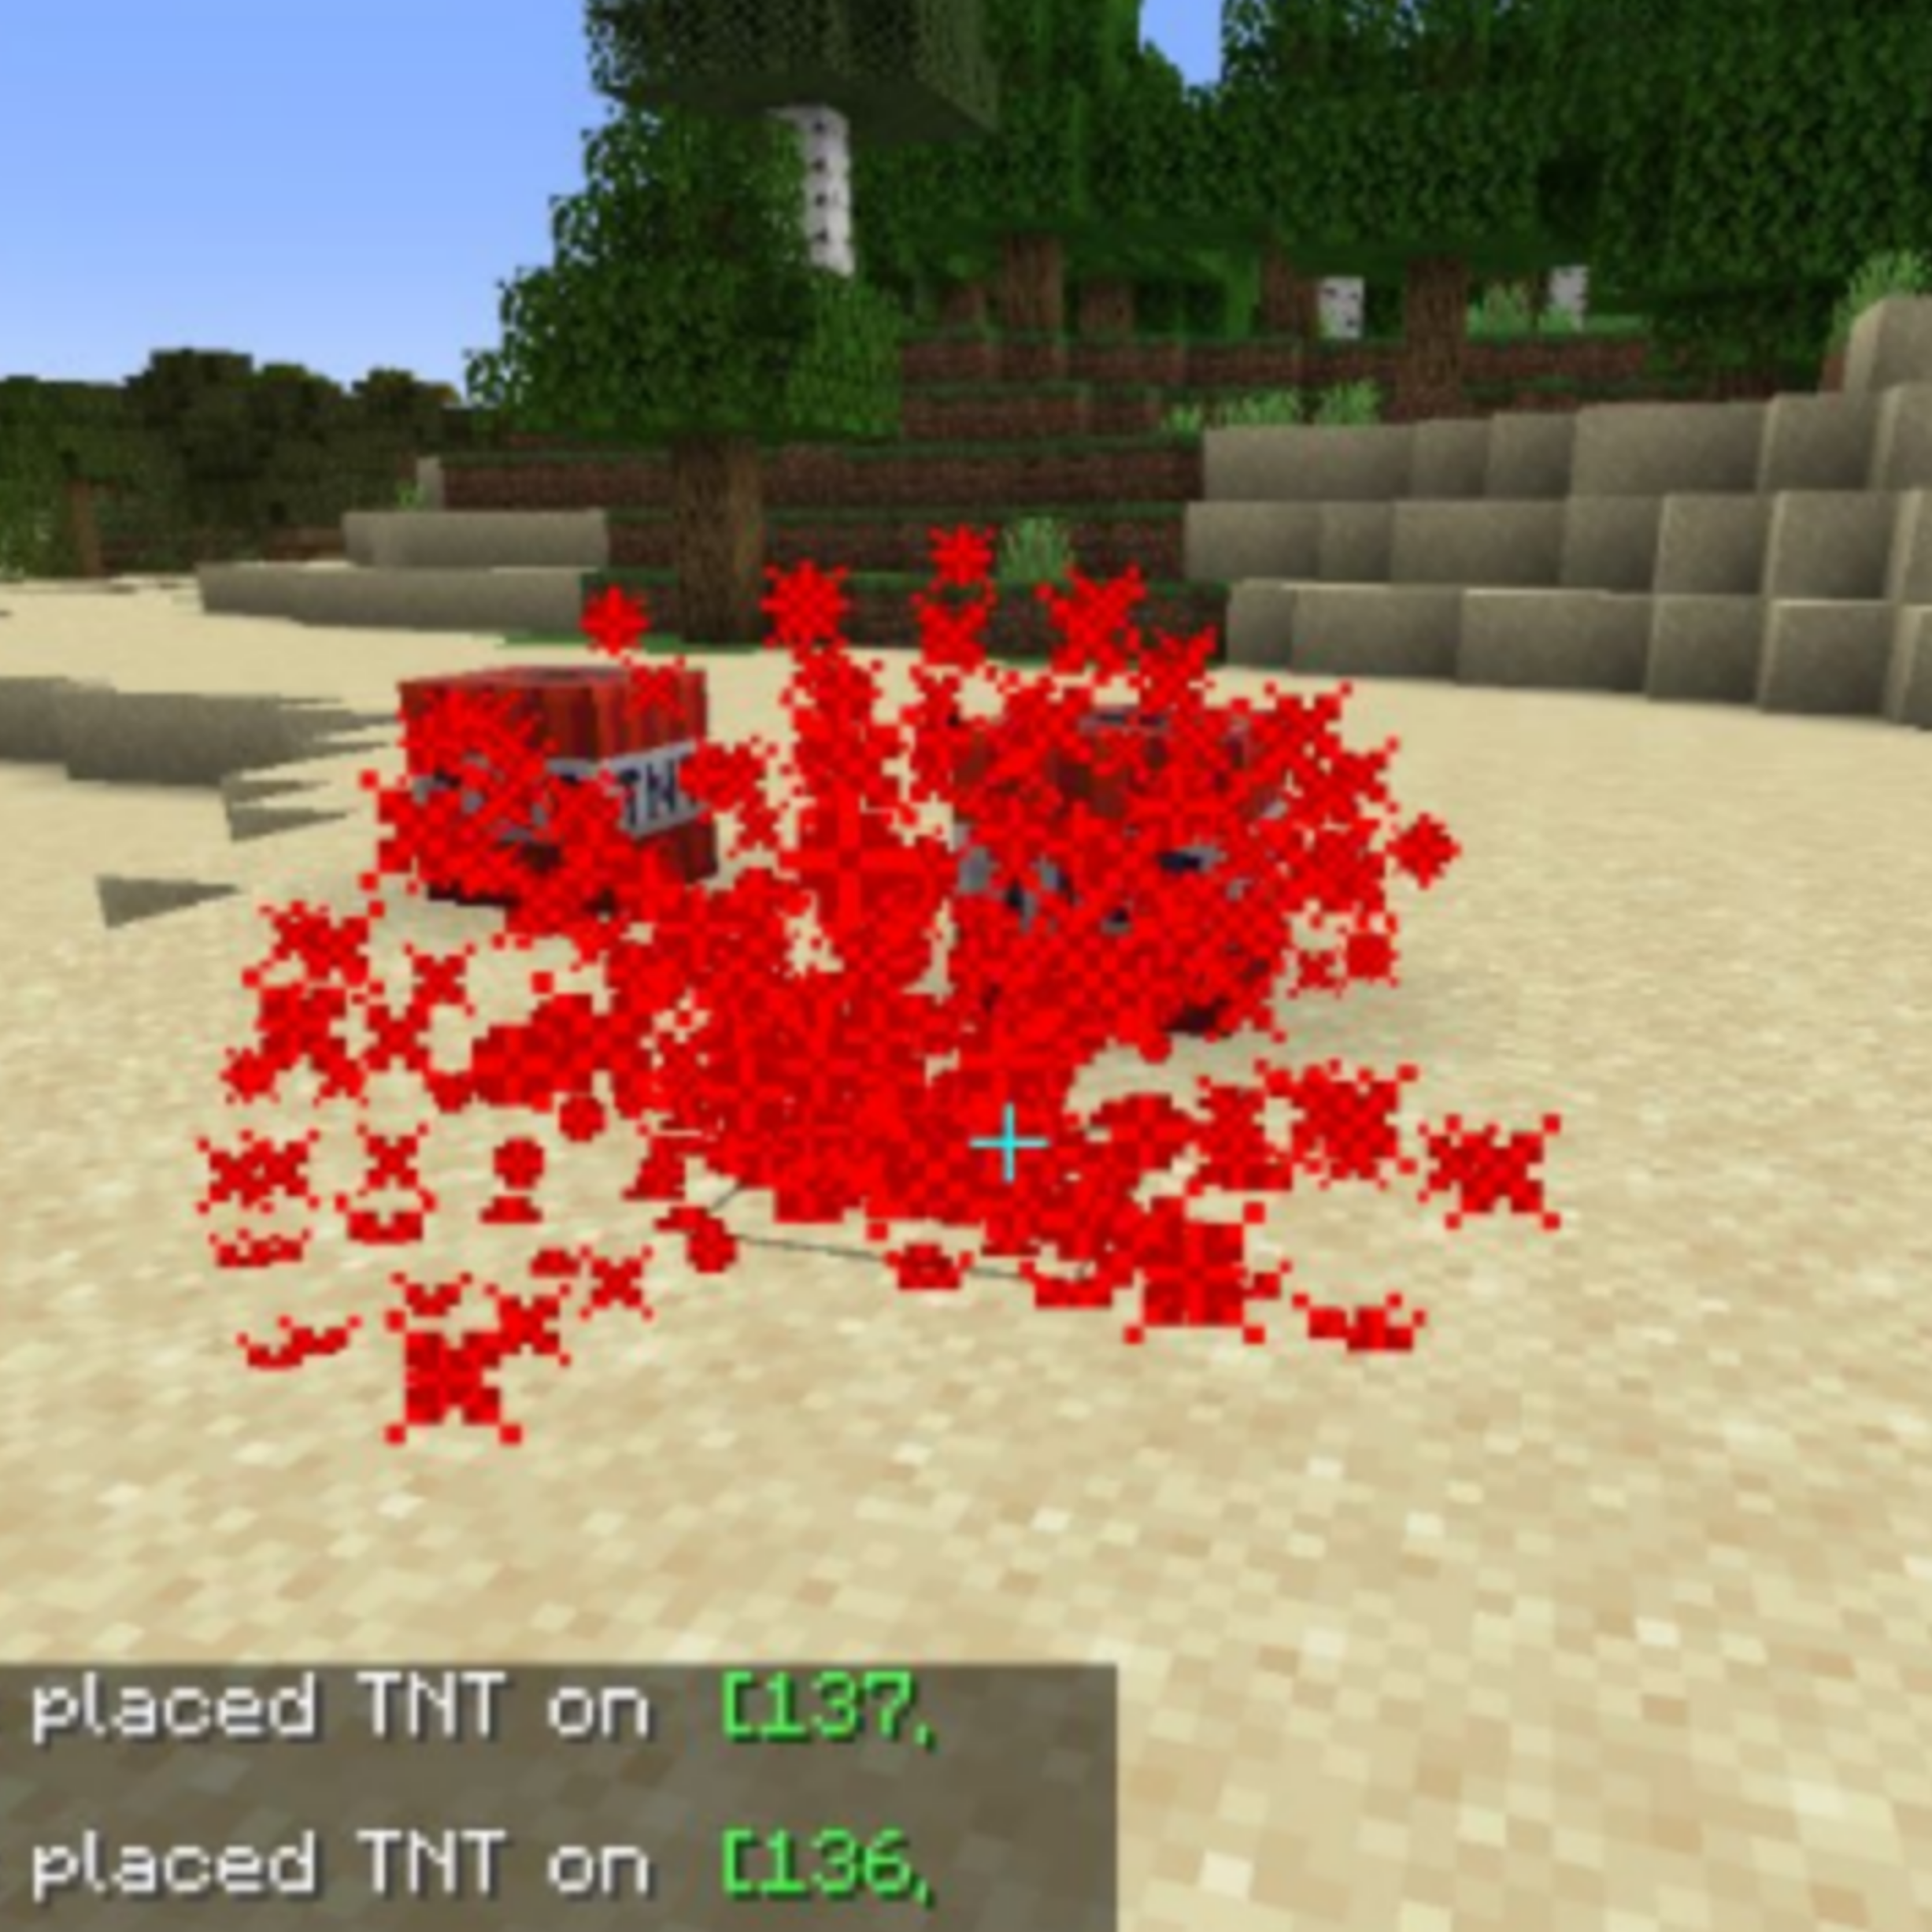 Silly TNT explosion.